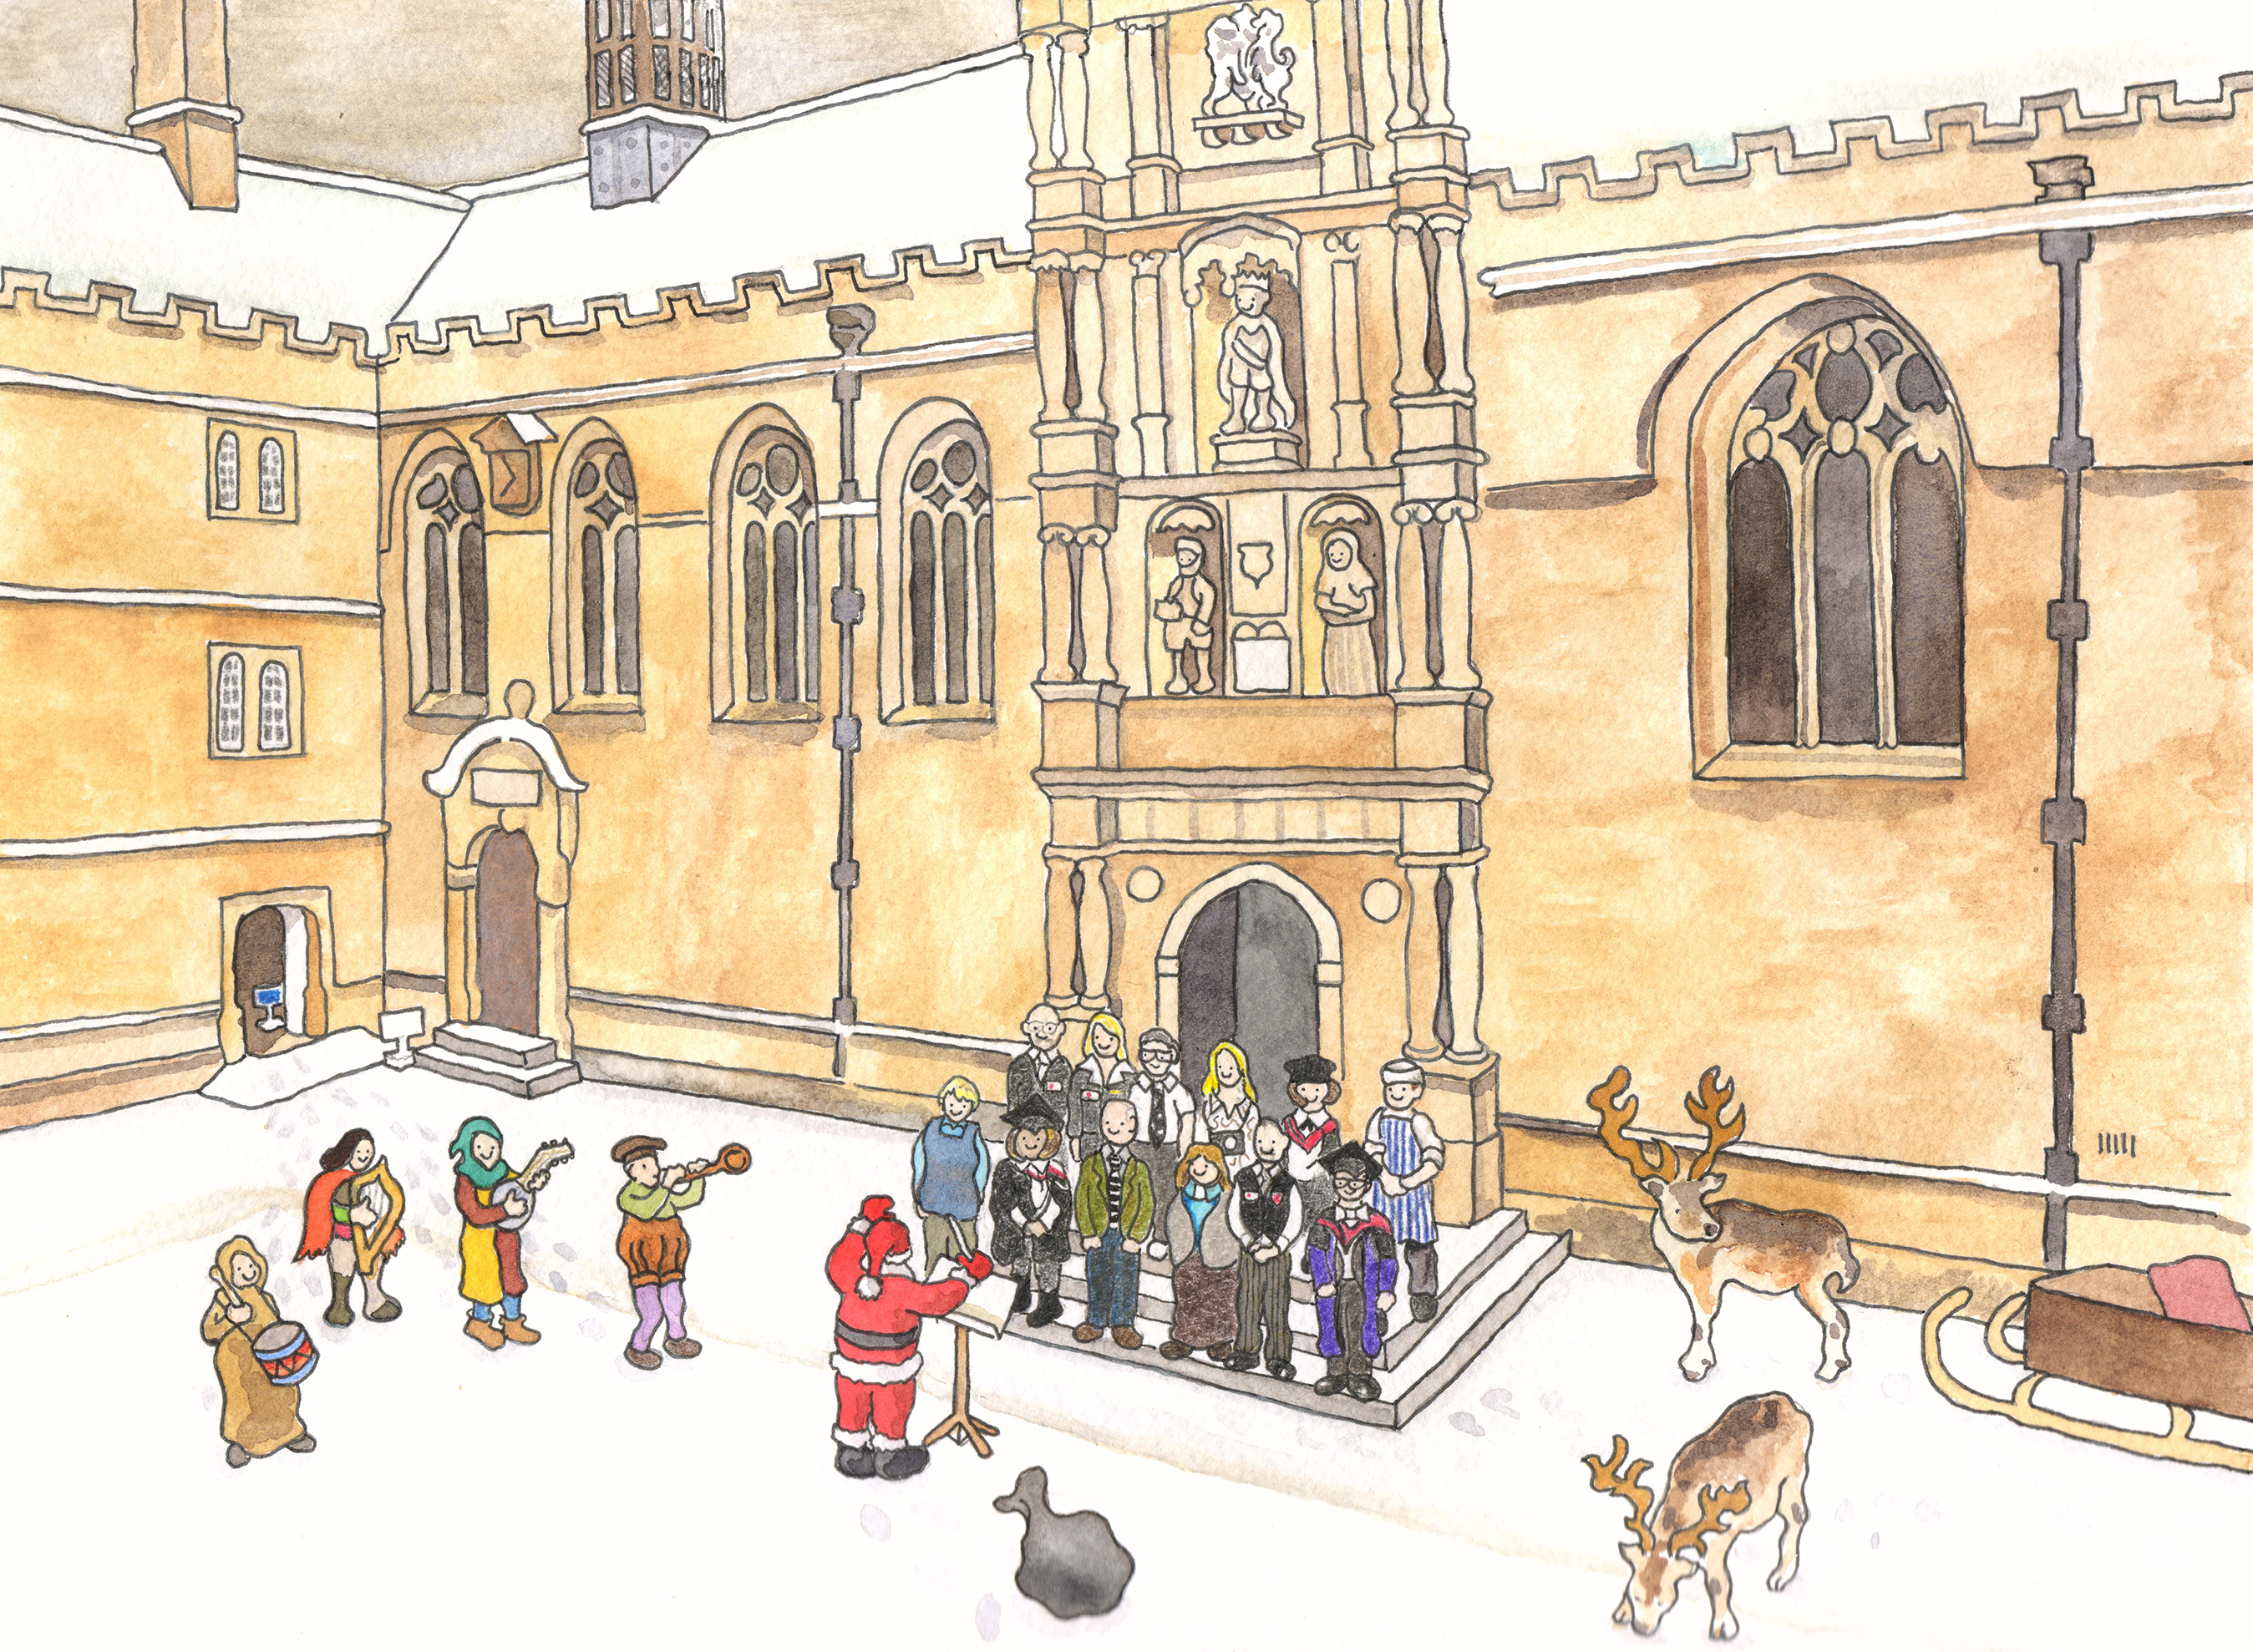 Wadham College Christmas card 2015<br>Various members of the college join the Christmas choir conducted by Santa